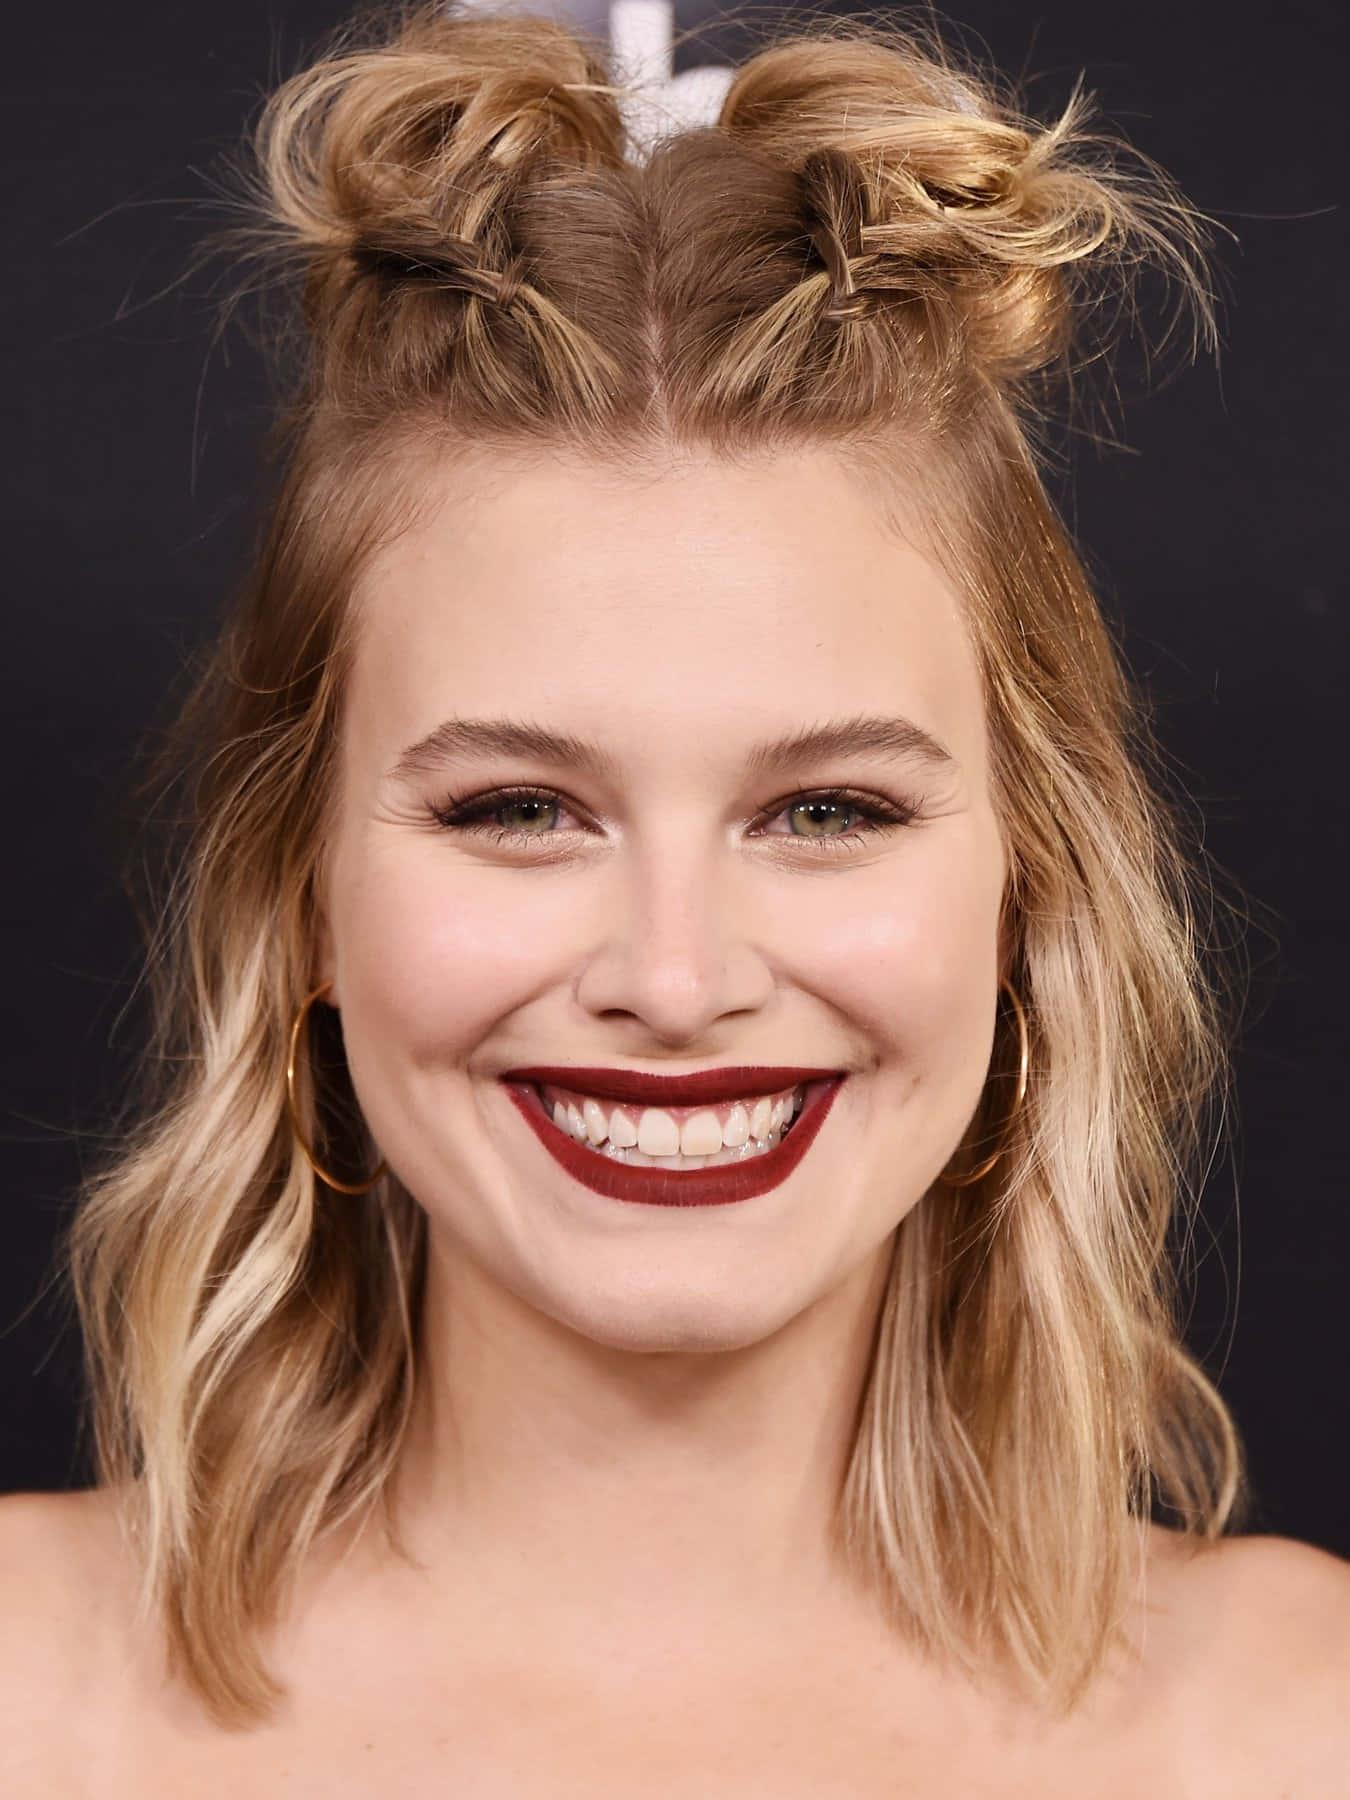 Smiling Womanwith Buns Hairstyleand Red Lipstick Wallpaper